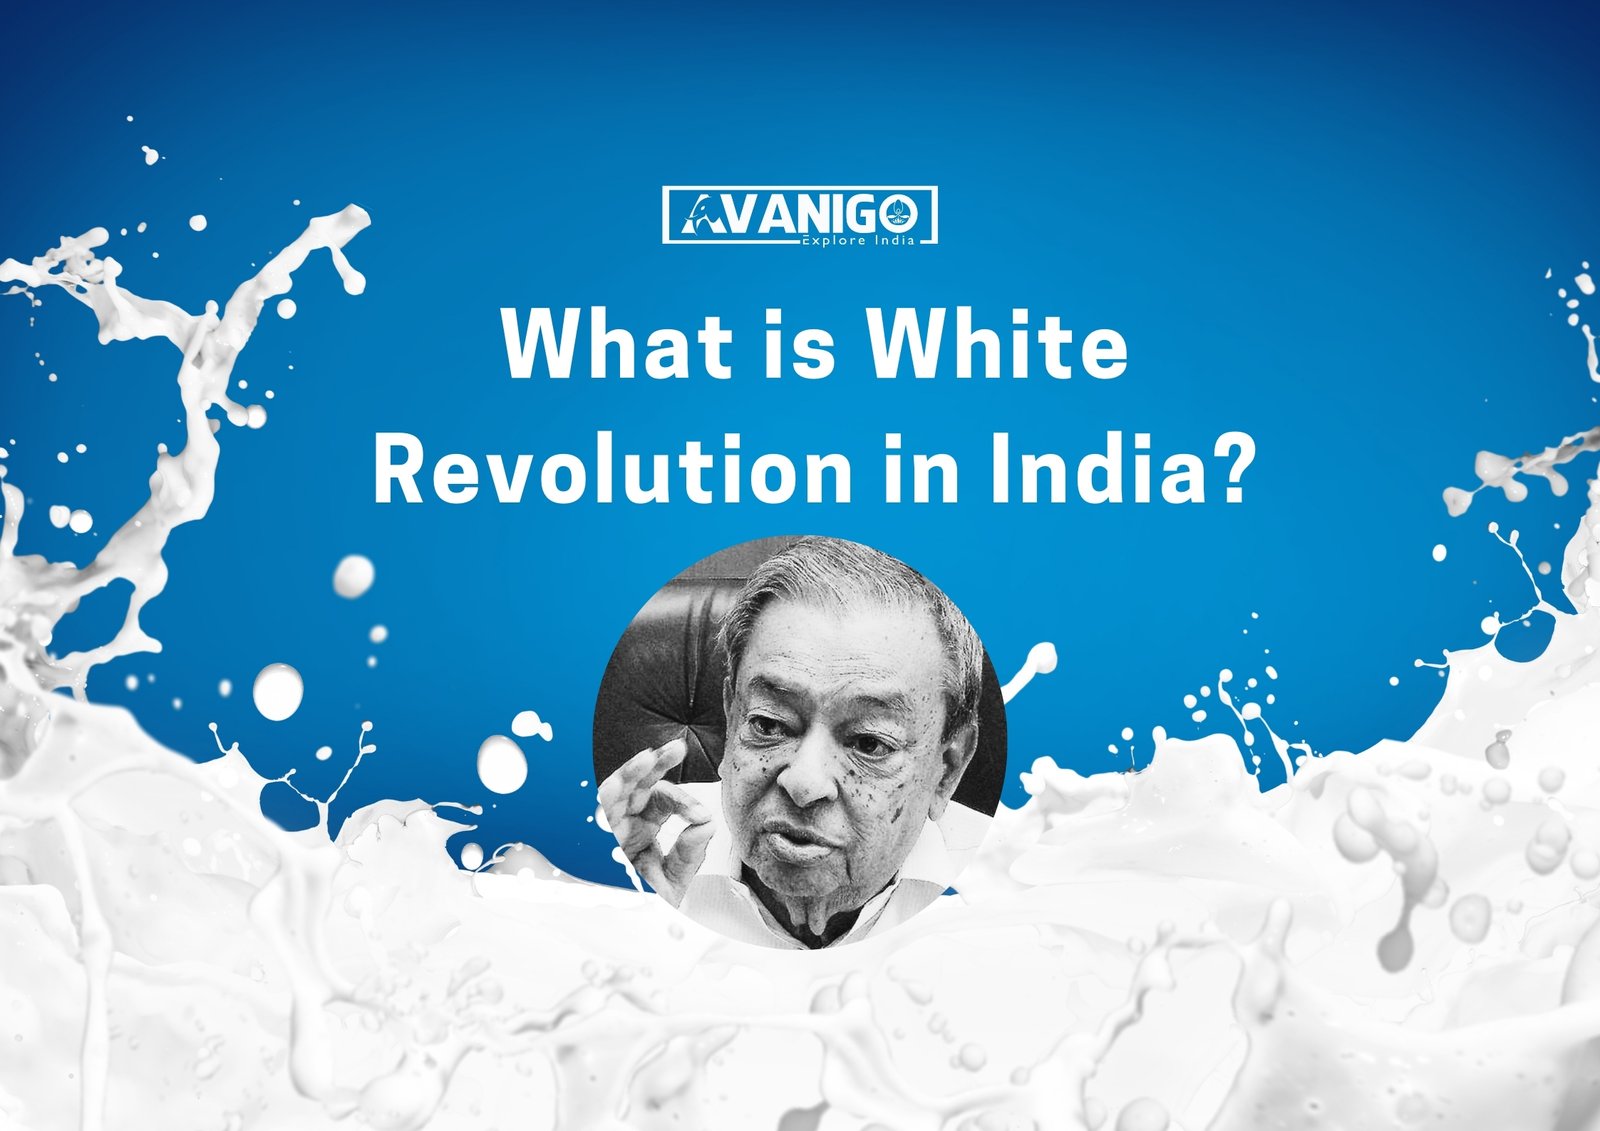 Image showing White revolution in India